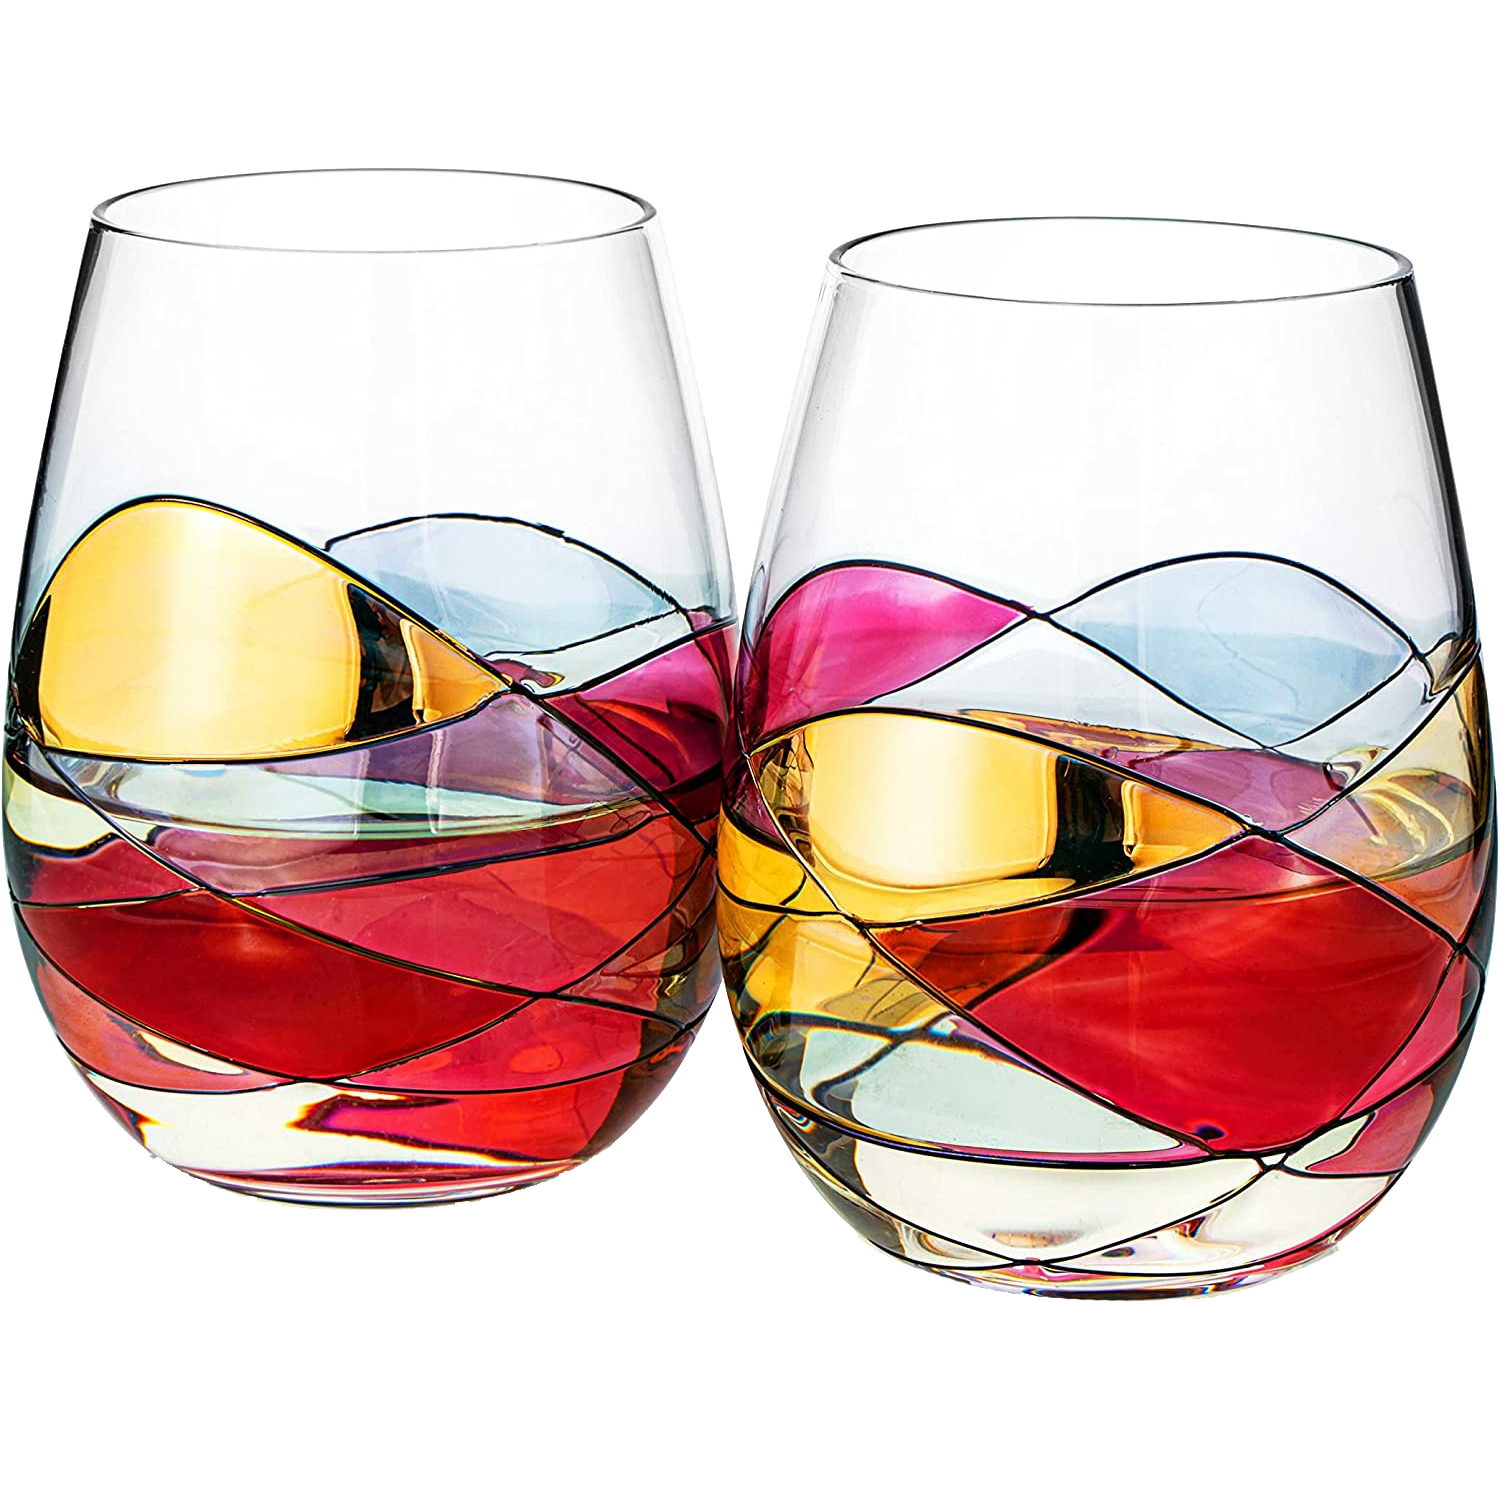 Artisanal Hand Painted Stemless - Gift for Mom, Friends, Girlfriends,  Renaissance Romantic Stain-glassed Windows Wine Glasses Set of 2 - Gift  Idea for